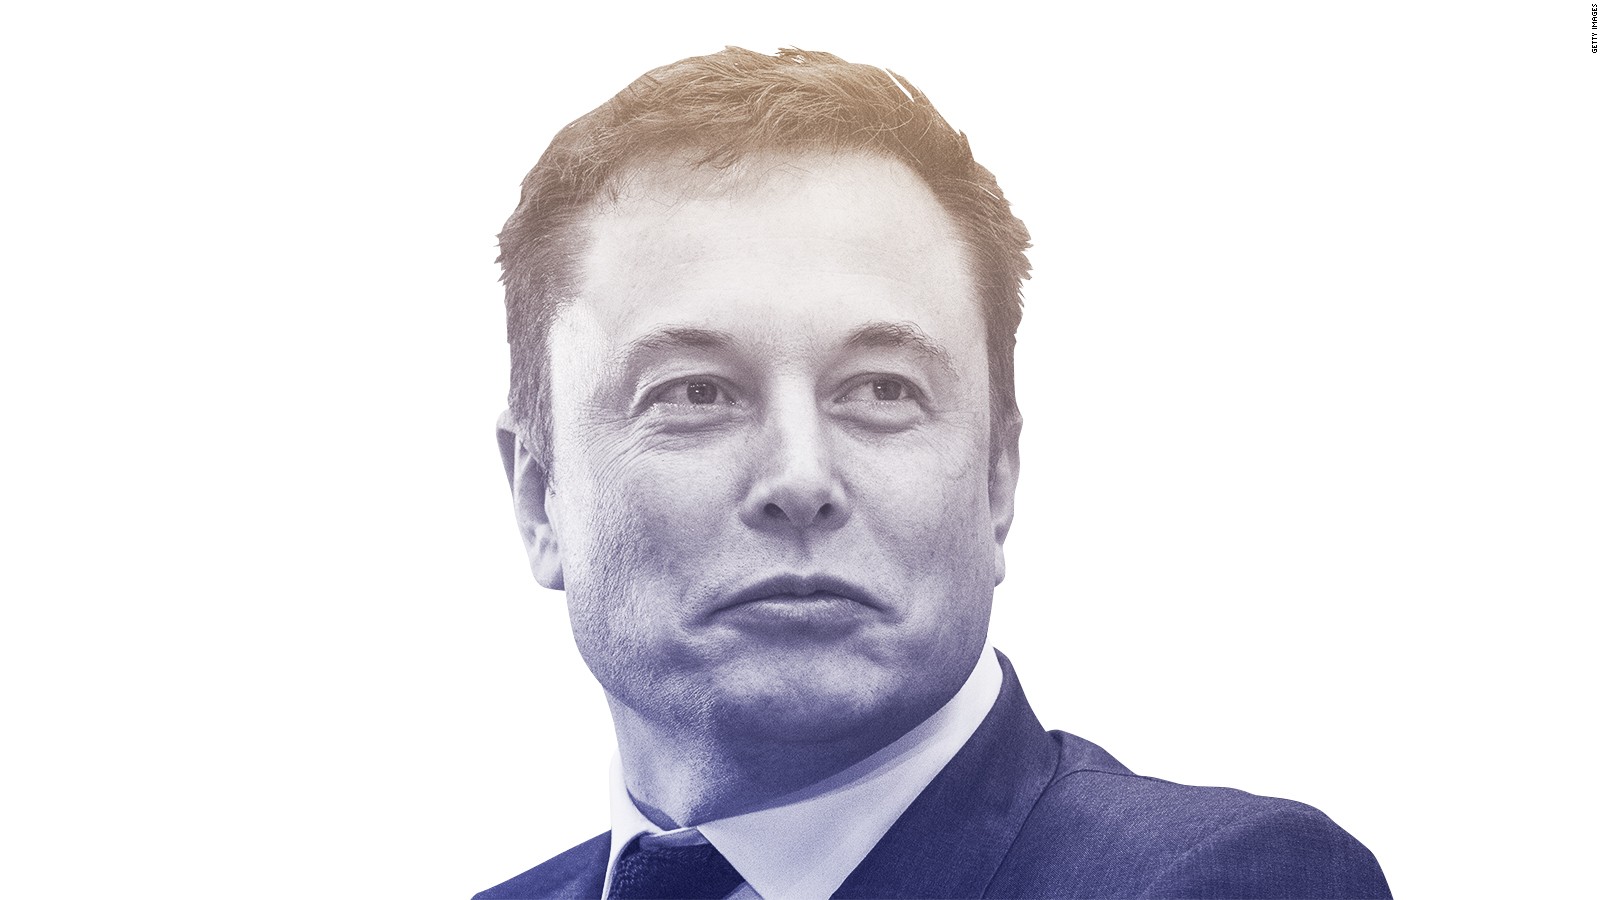 View Elon Musk Bitcoin Founder Images